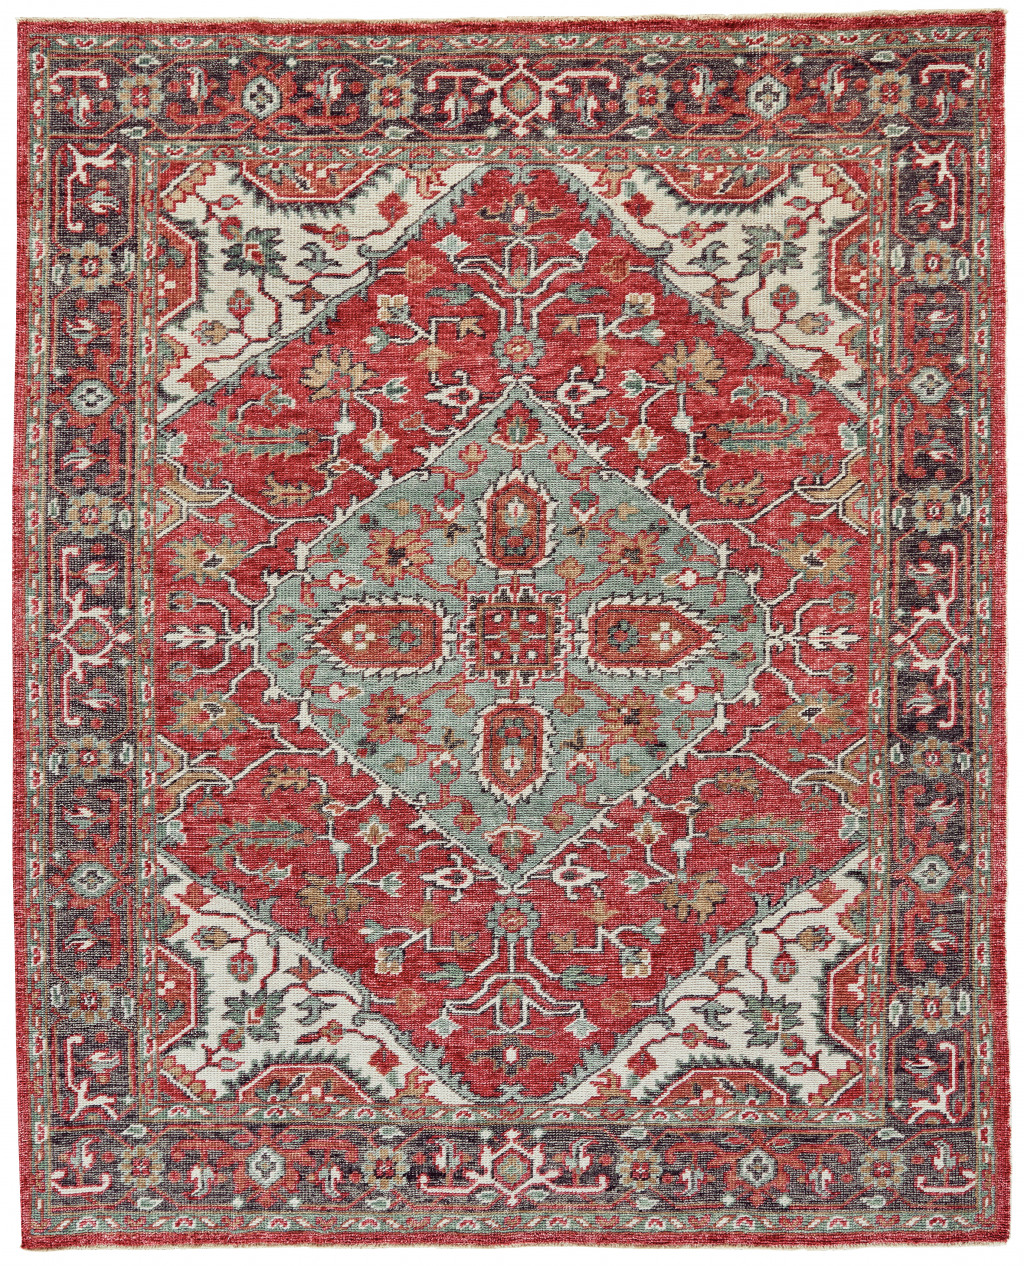 5' X 8' Red Gray And Ivory Wool Floral Hand Knotted Distressed Stain Resistant Area Rug With Fringe-511617-1